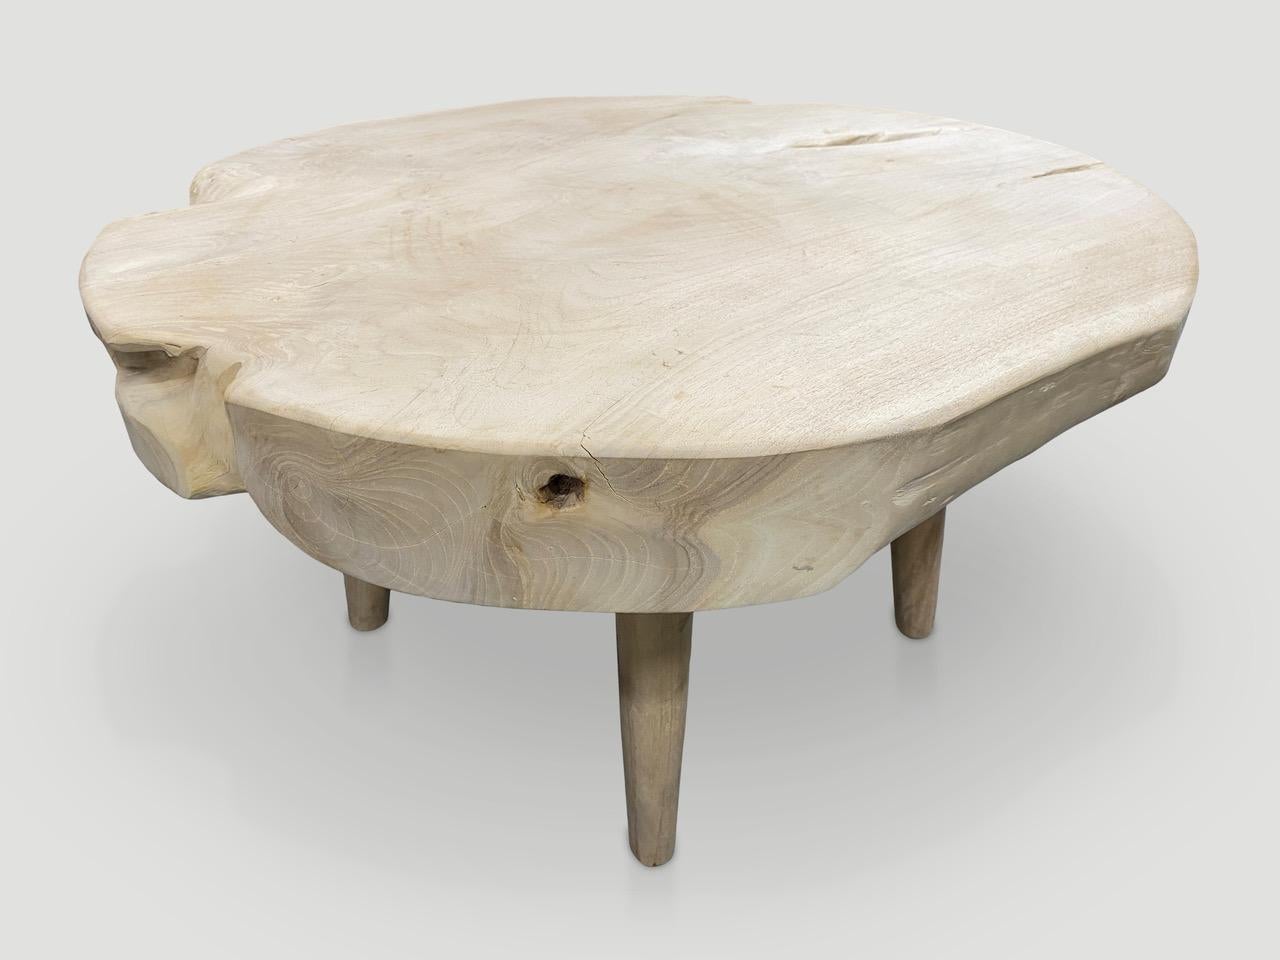 Impressive four inch single slab reclaimed teak wood coffee table. We bleached the teak and added a light white wash revealing the beautiful wood grain. Floating on mid century style legs. Organic with a twist. Also available charred and natural